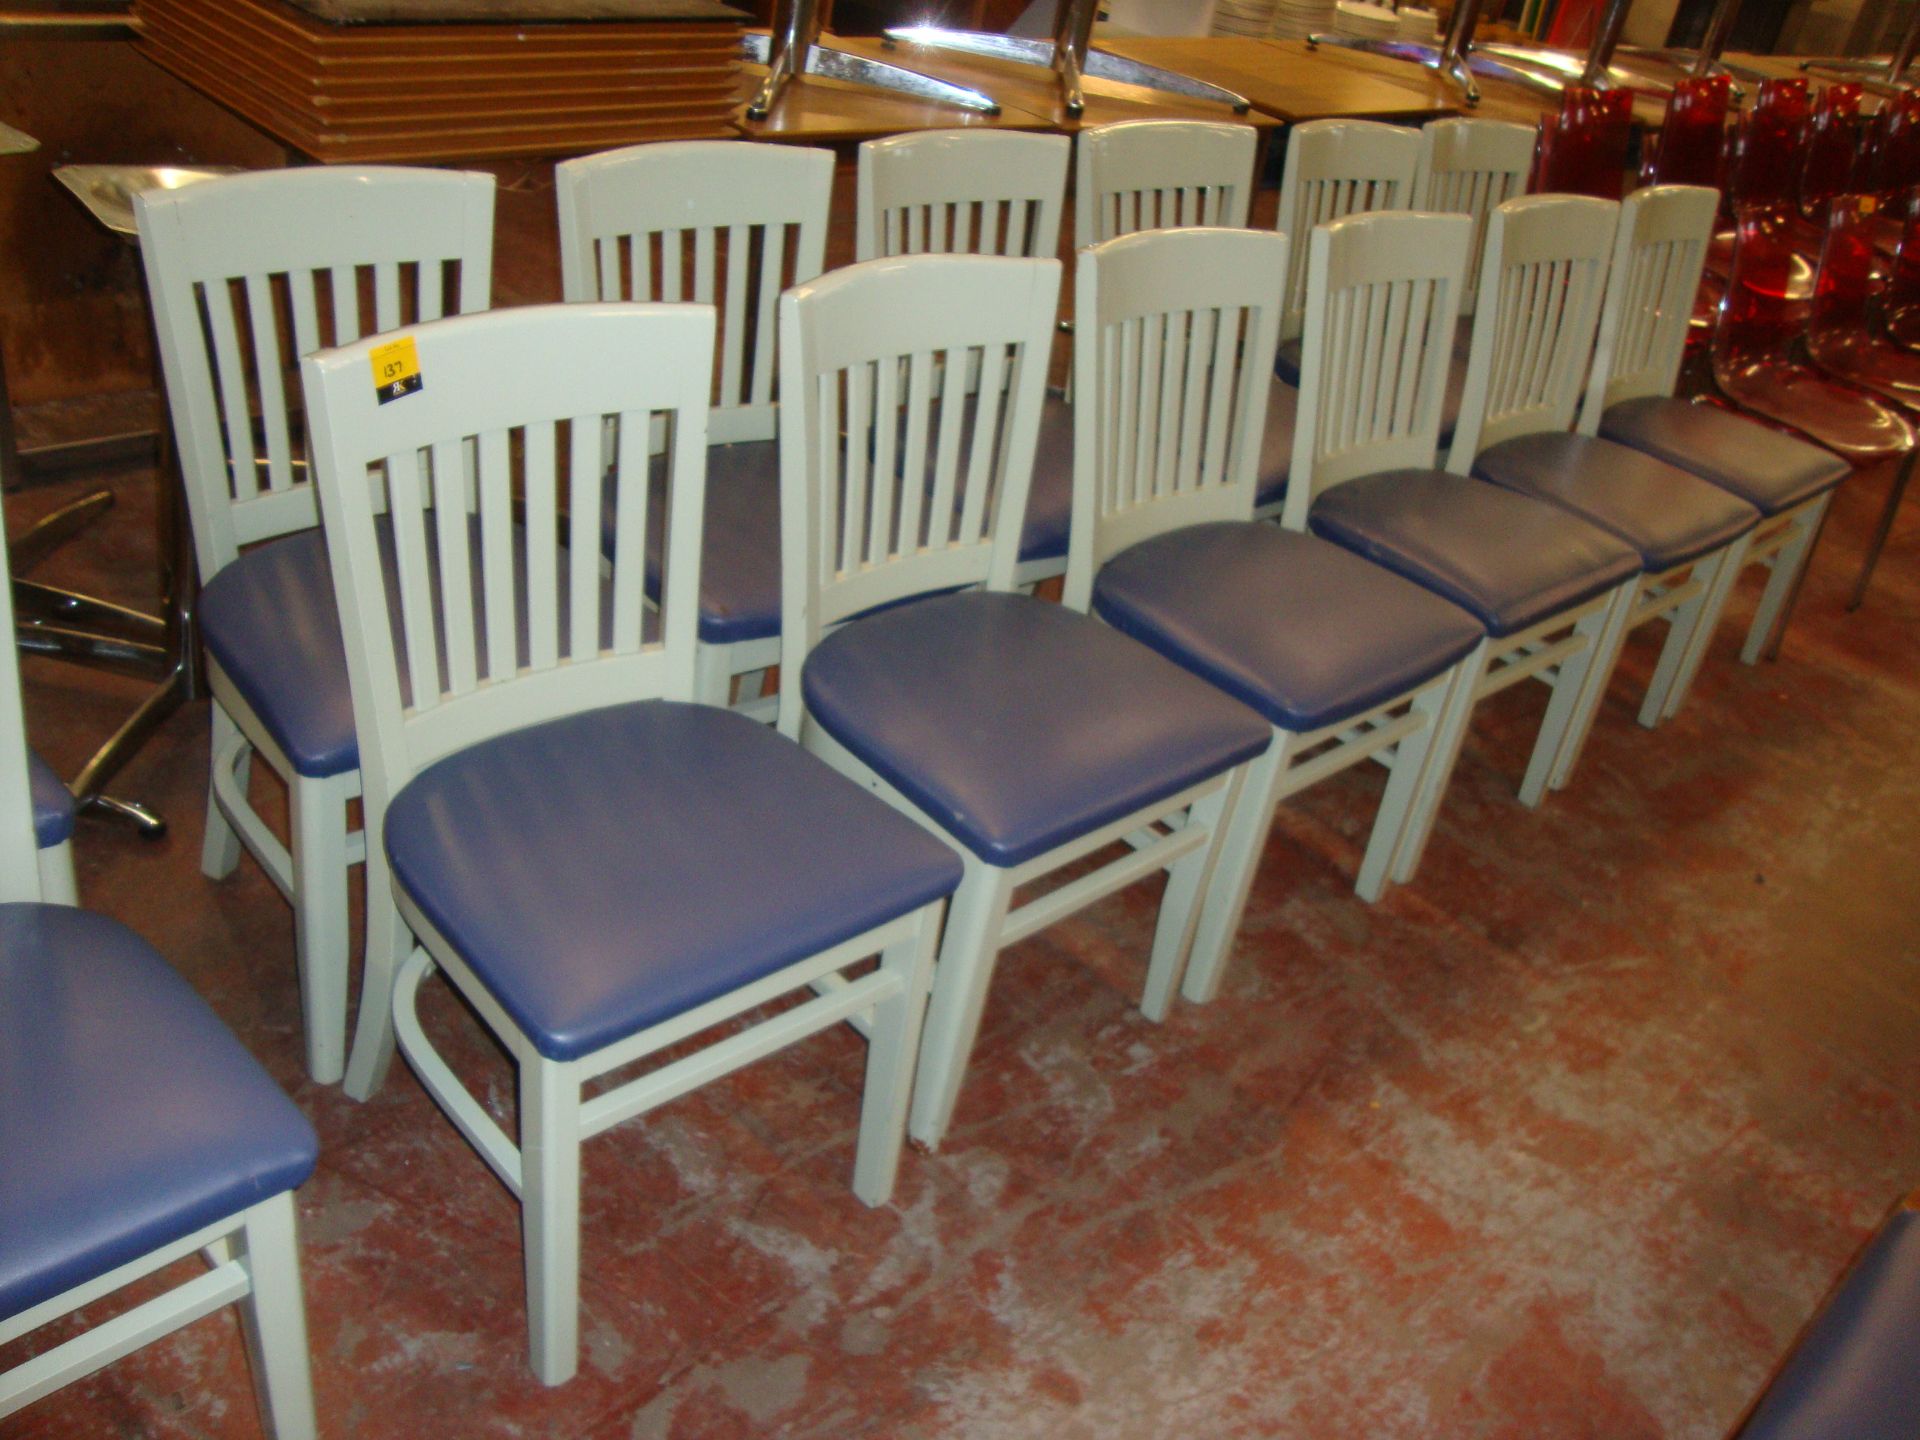 12 off pale green painted wooden chairs with blue upholstered seat bases. NB lots 131 - 137